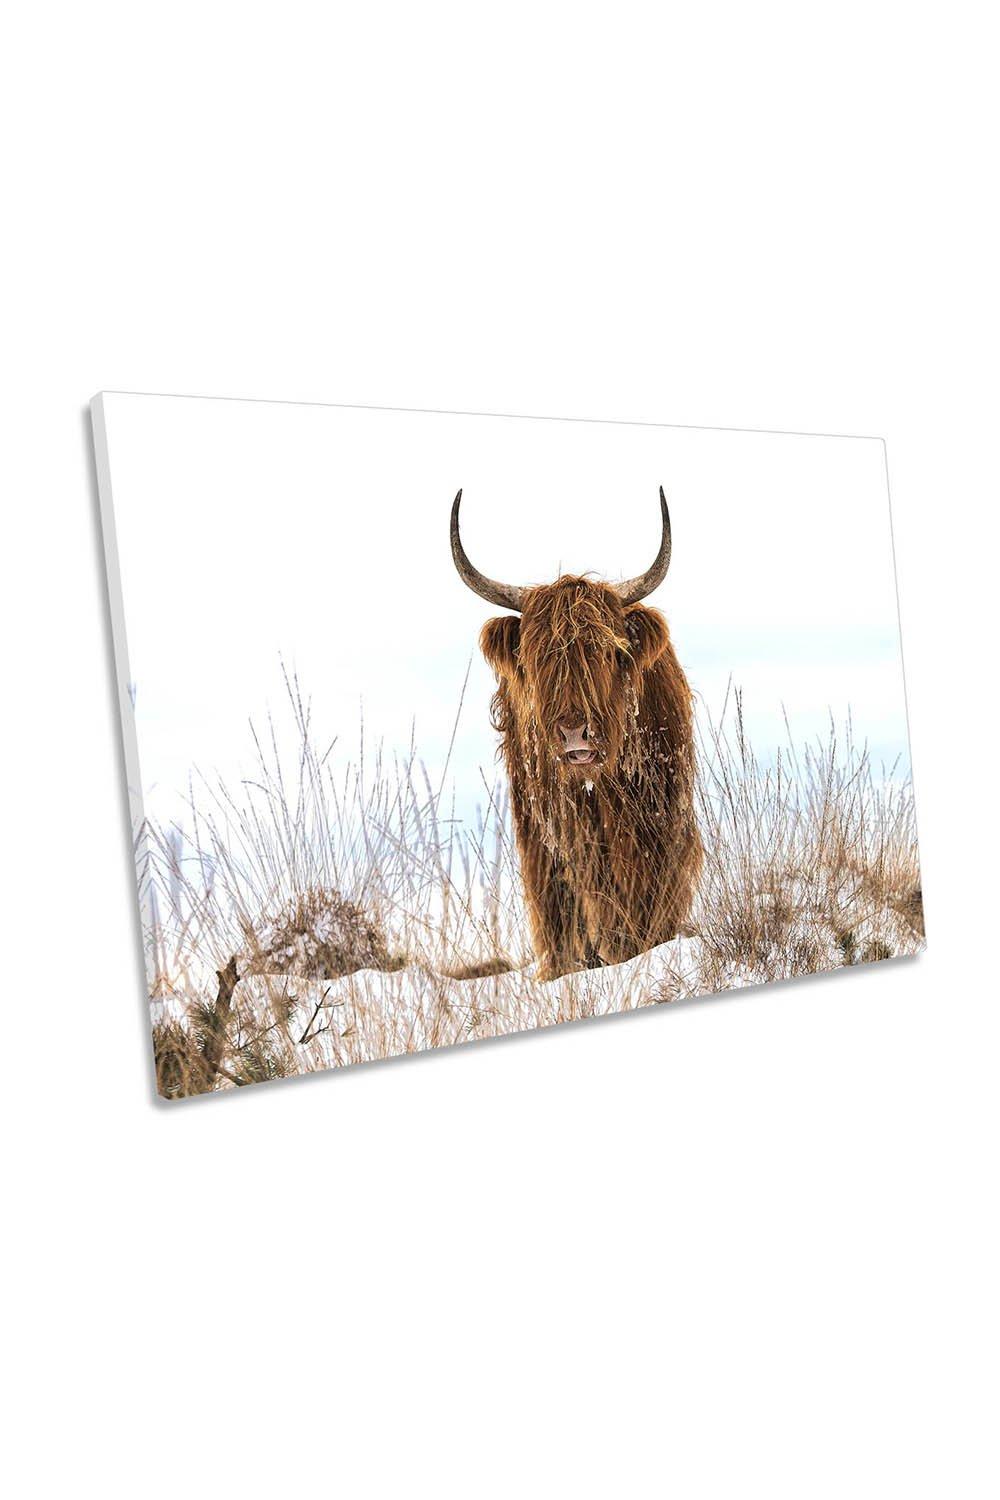 Highland Scottish Cow in the Snow Canvas Wall Art Picture Print